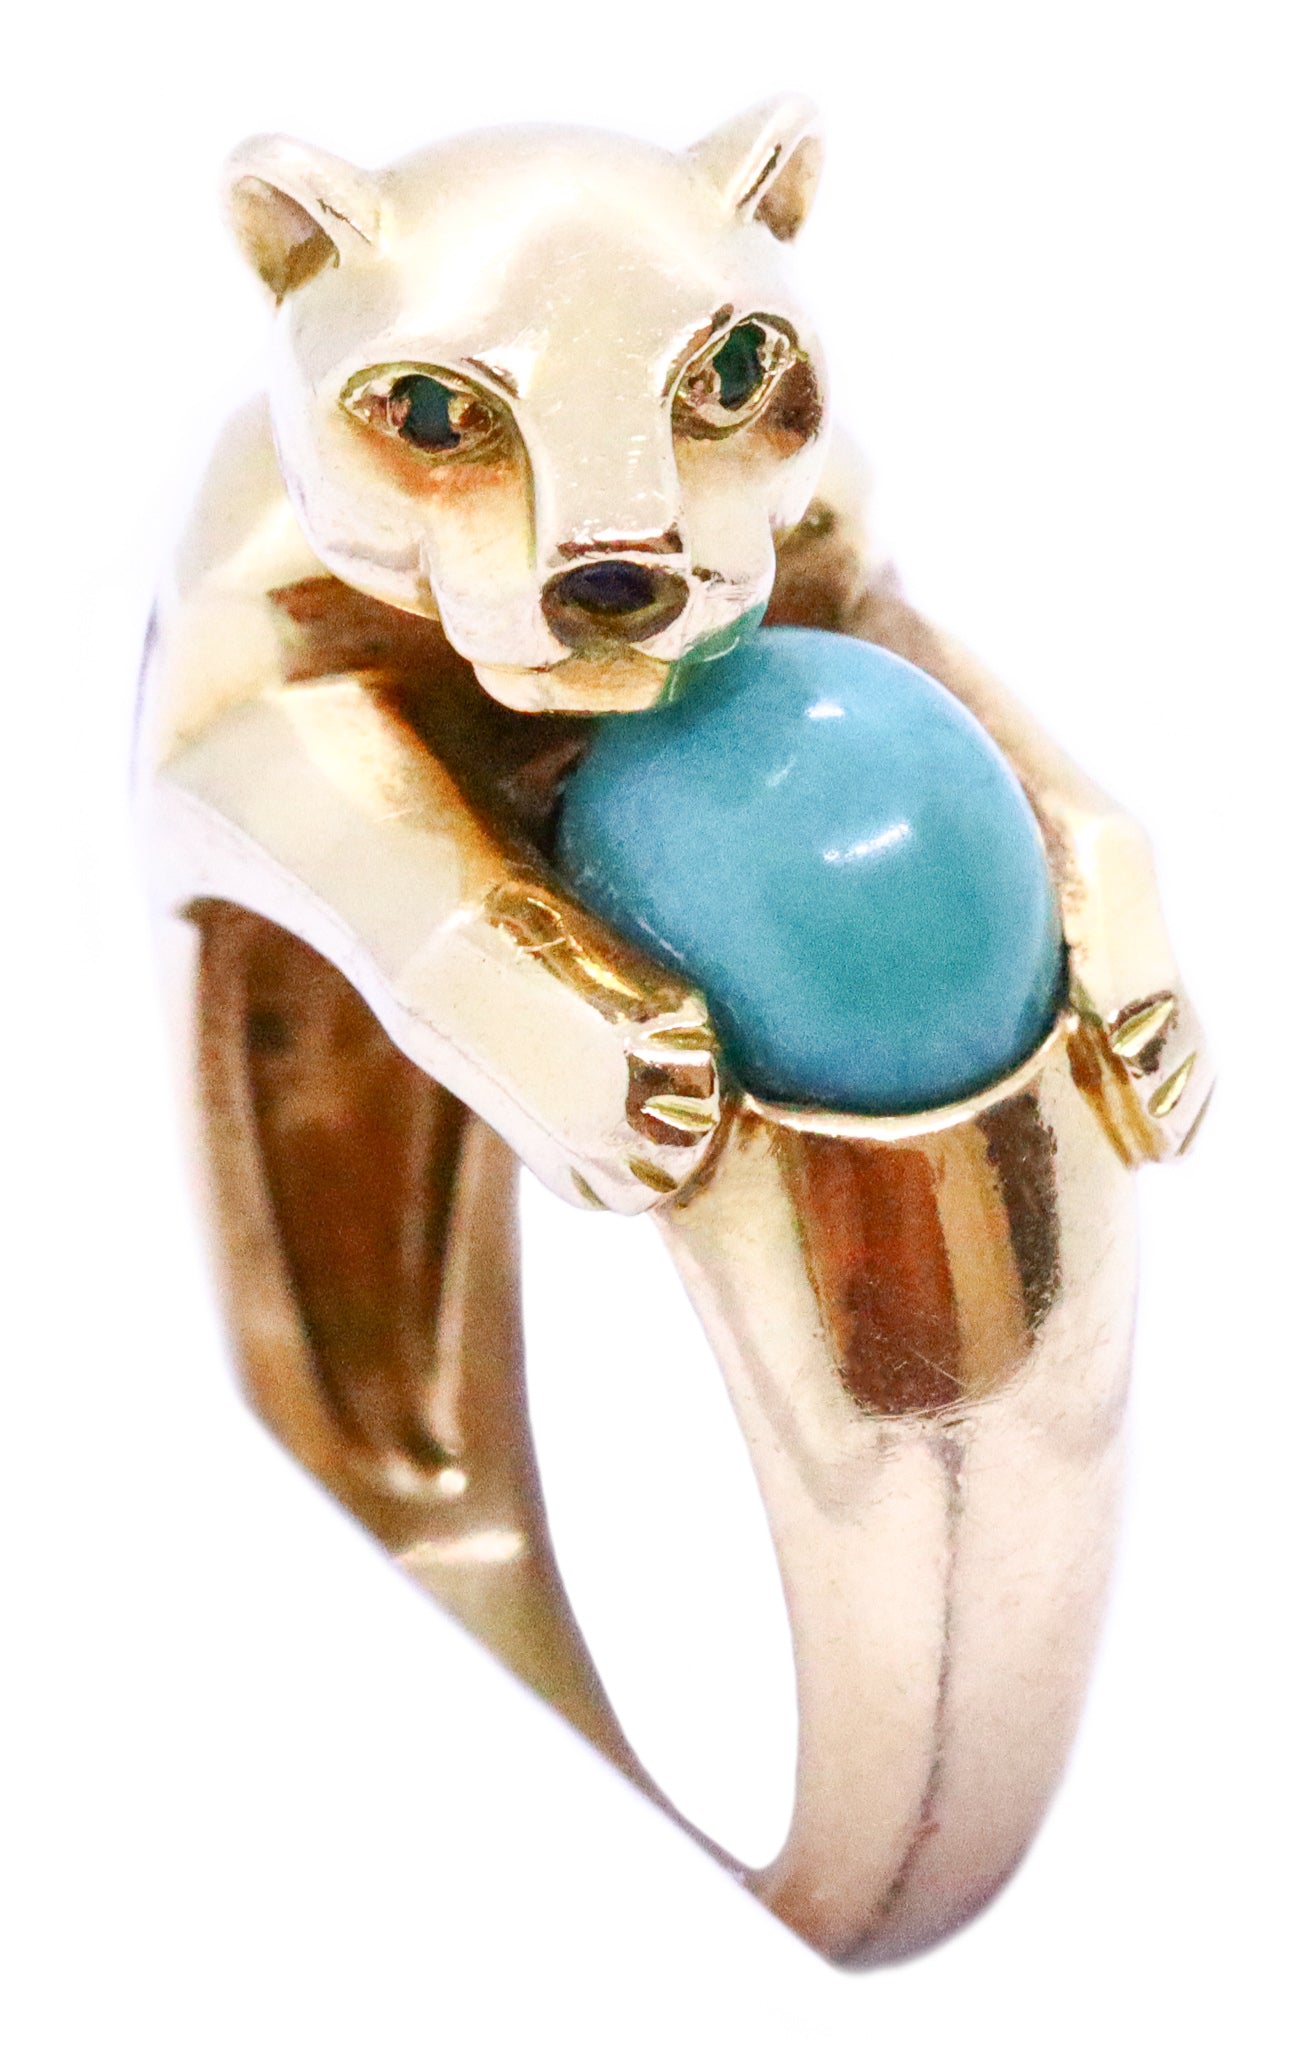 CARTIER PARIS 1970 "PANTHERE" RING WITH A PERSIAN TURQUOISE ONYX & EMERALD